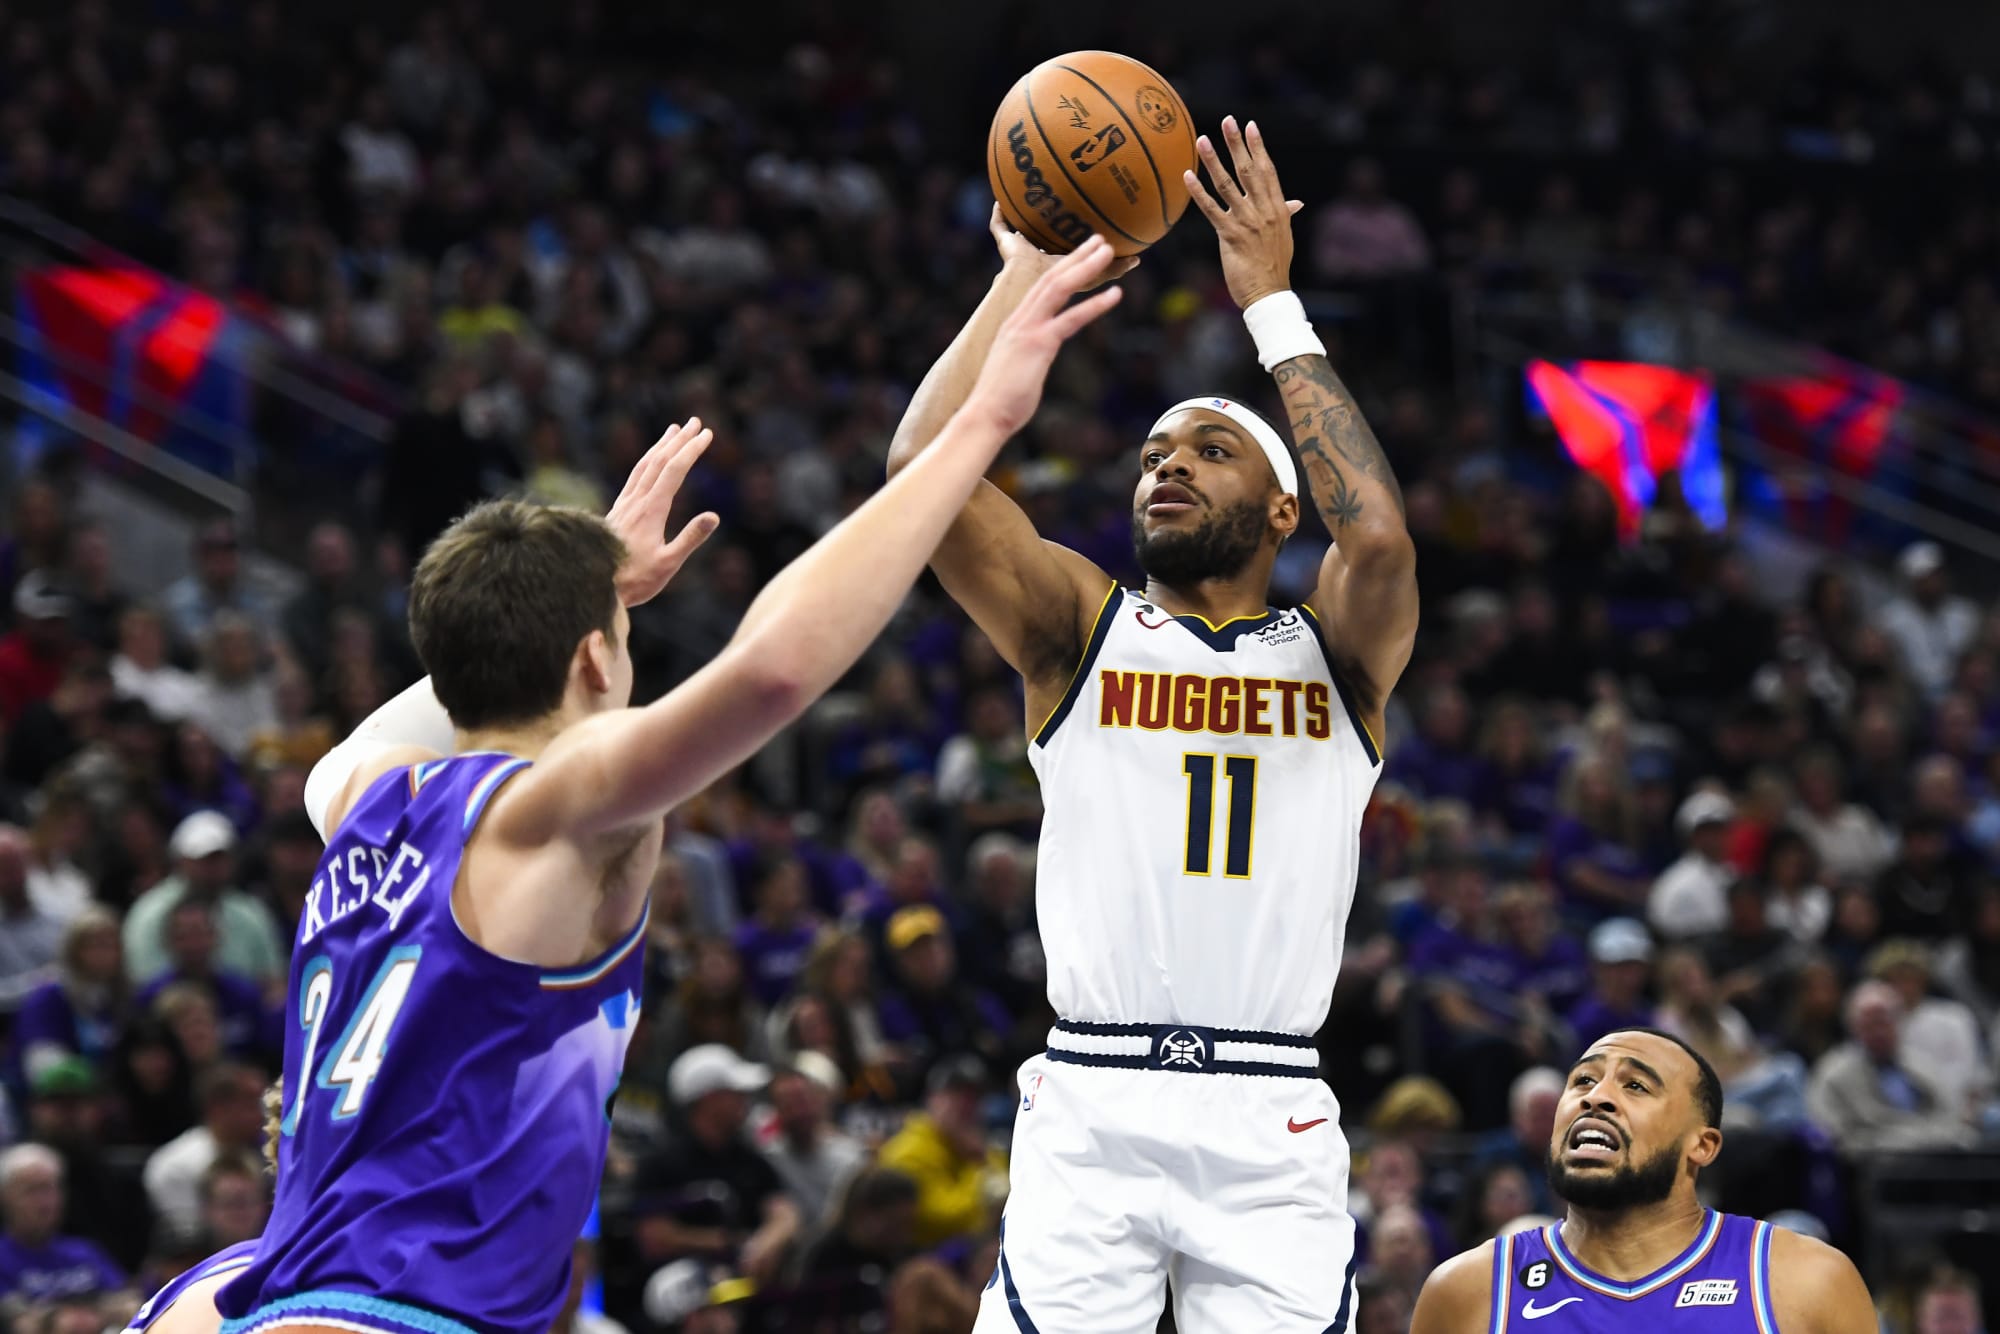 Nuggets Game Tonight Nuggets vs. Jazz Odds, Starting Lineup, Injury